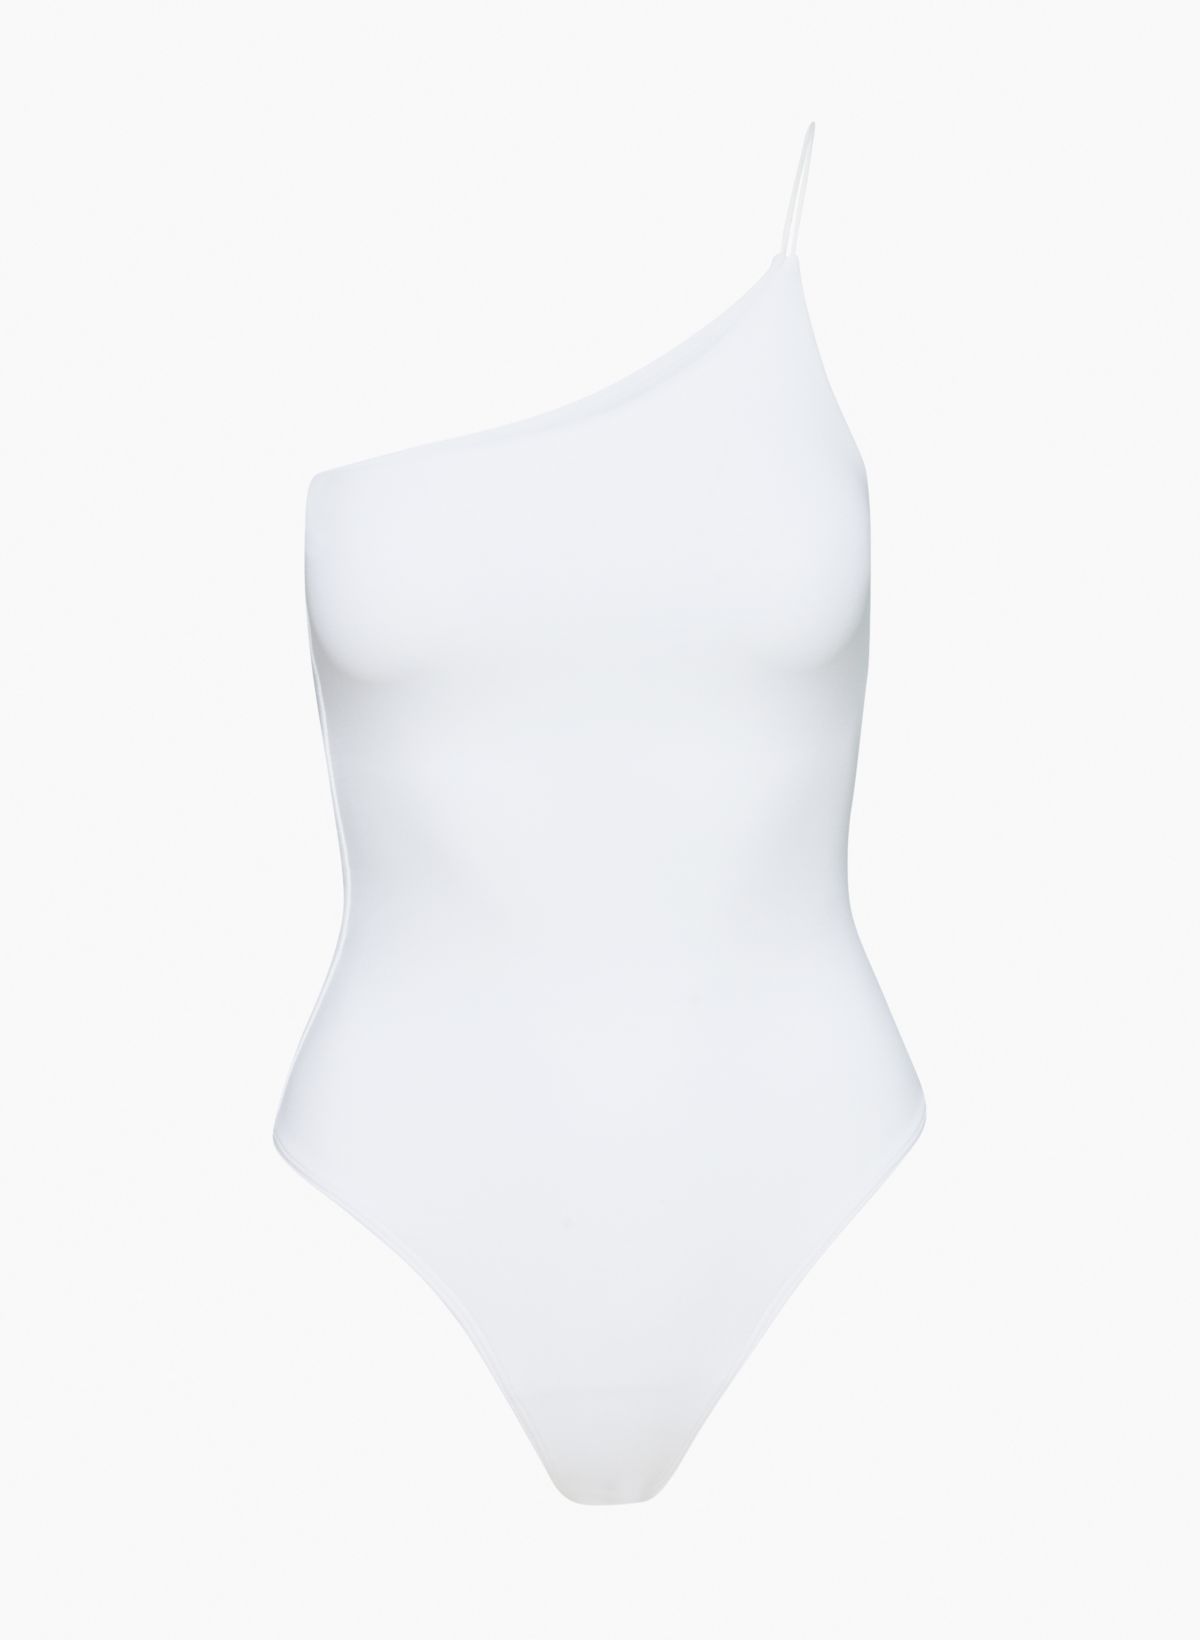 How do you get stains out of white Aritiza body suit. I washed it